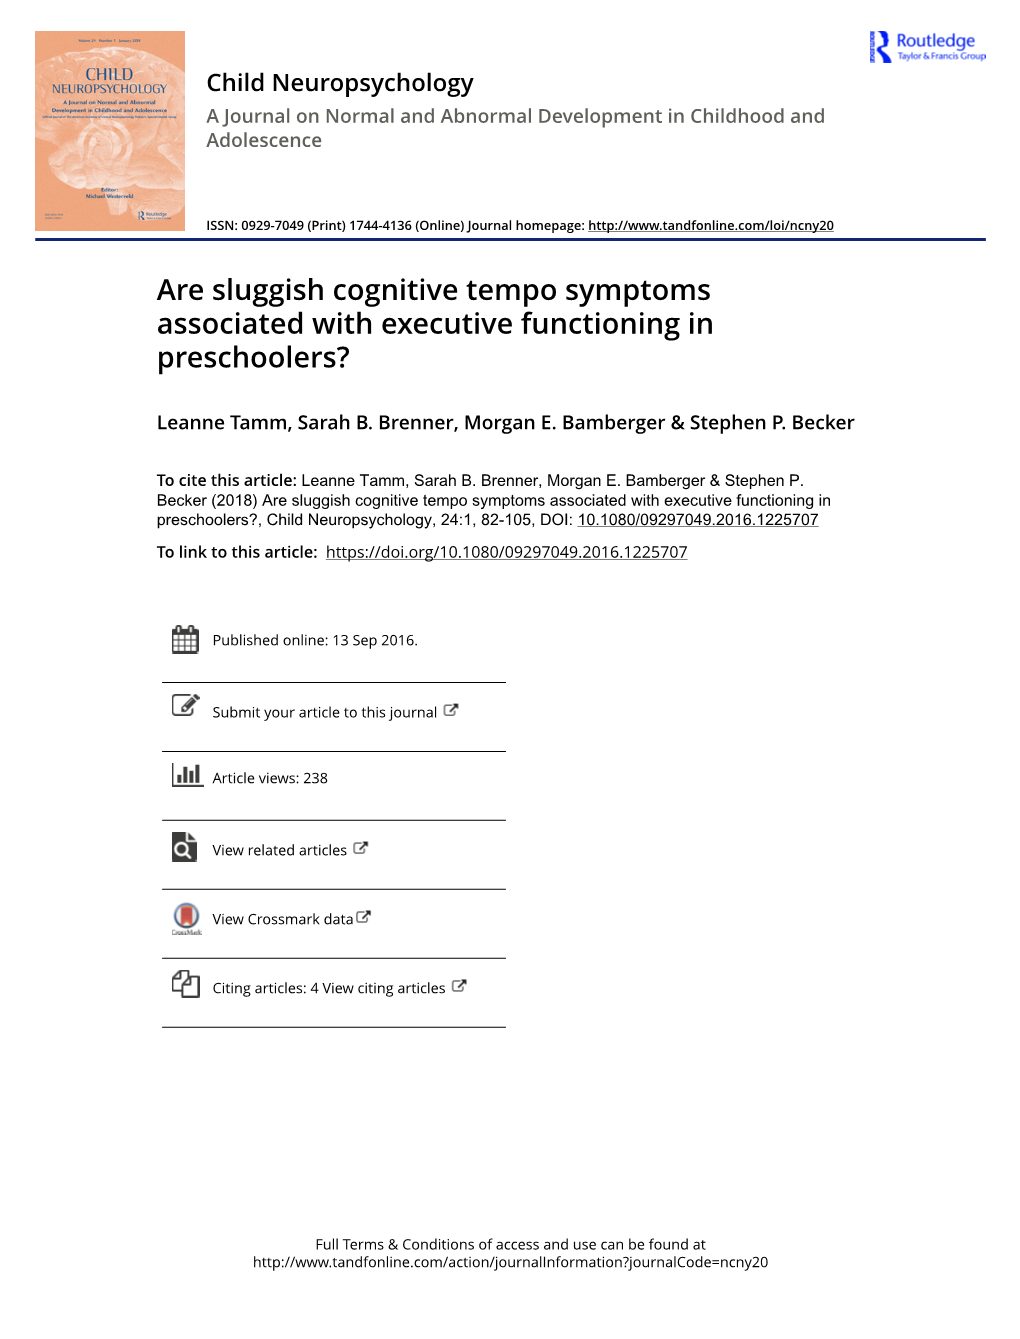 Are Sluggish Cognitive Tempo Symptoms Associated with Executive Functioning in Preschoolers?